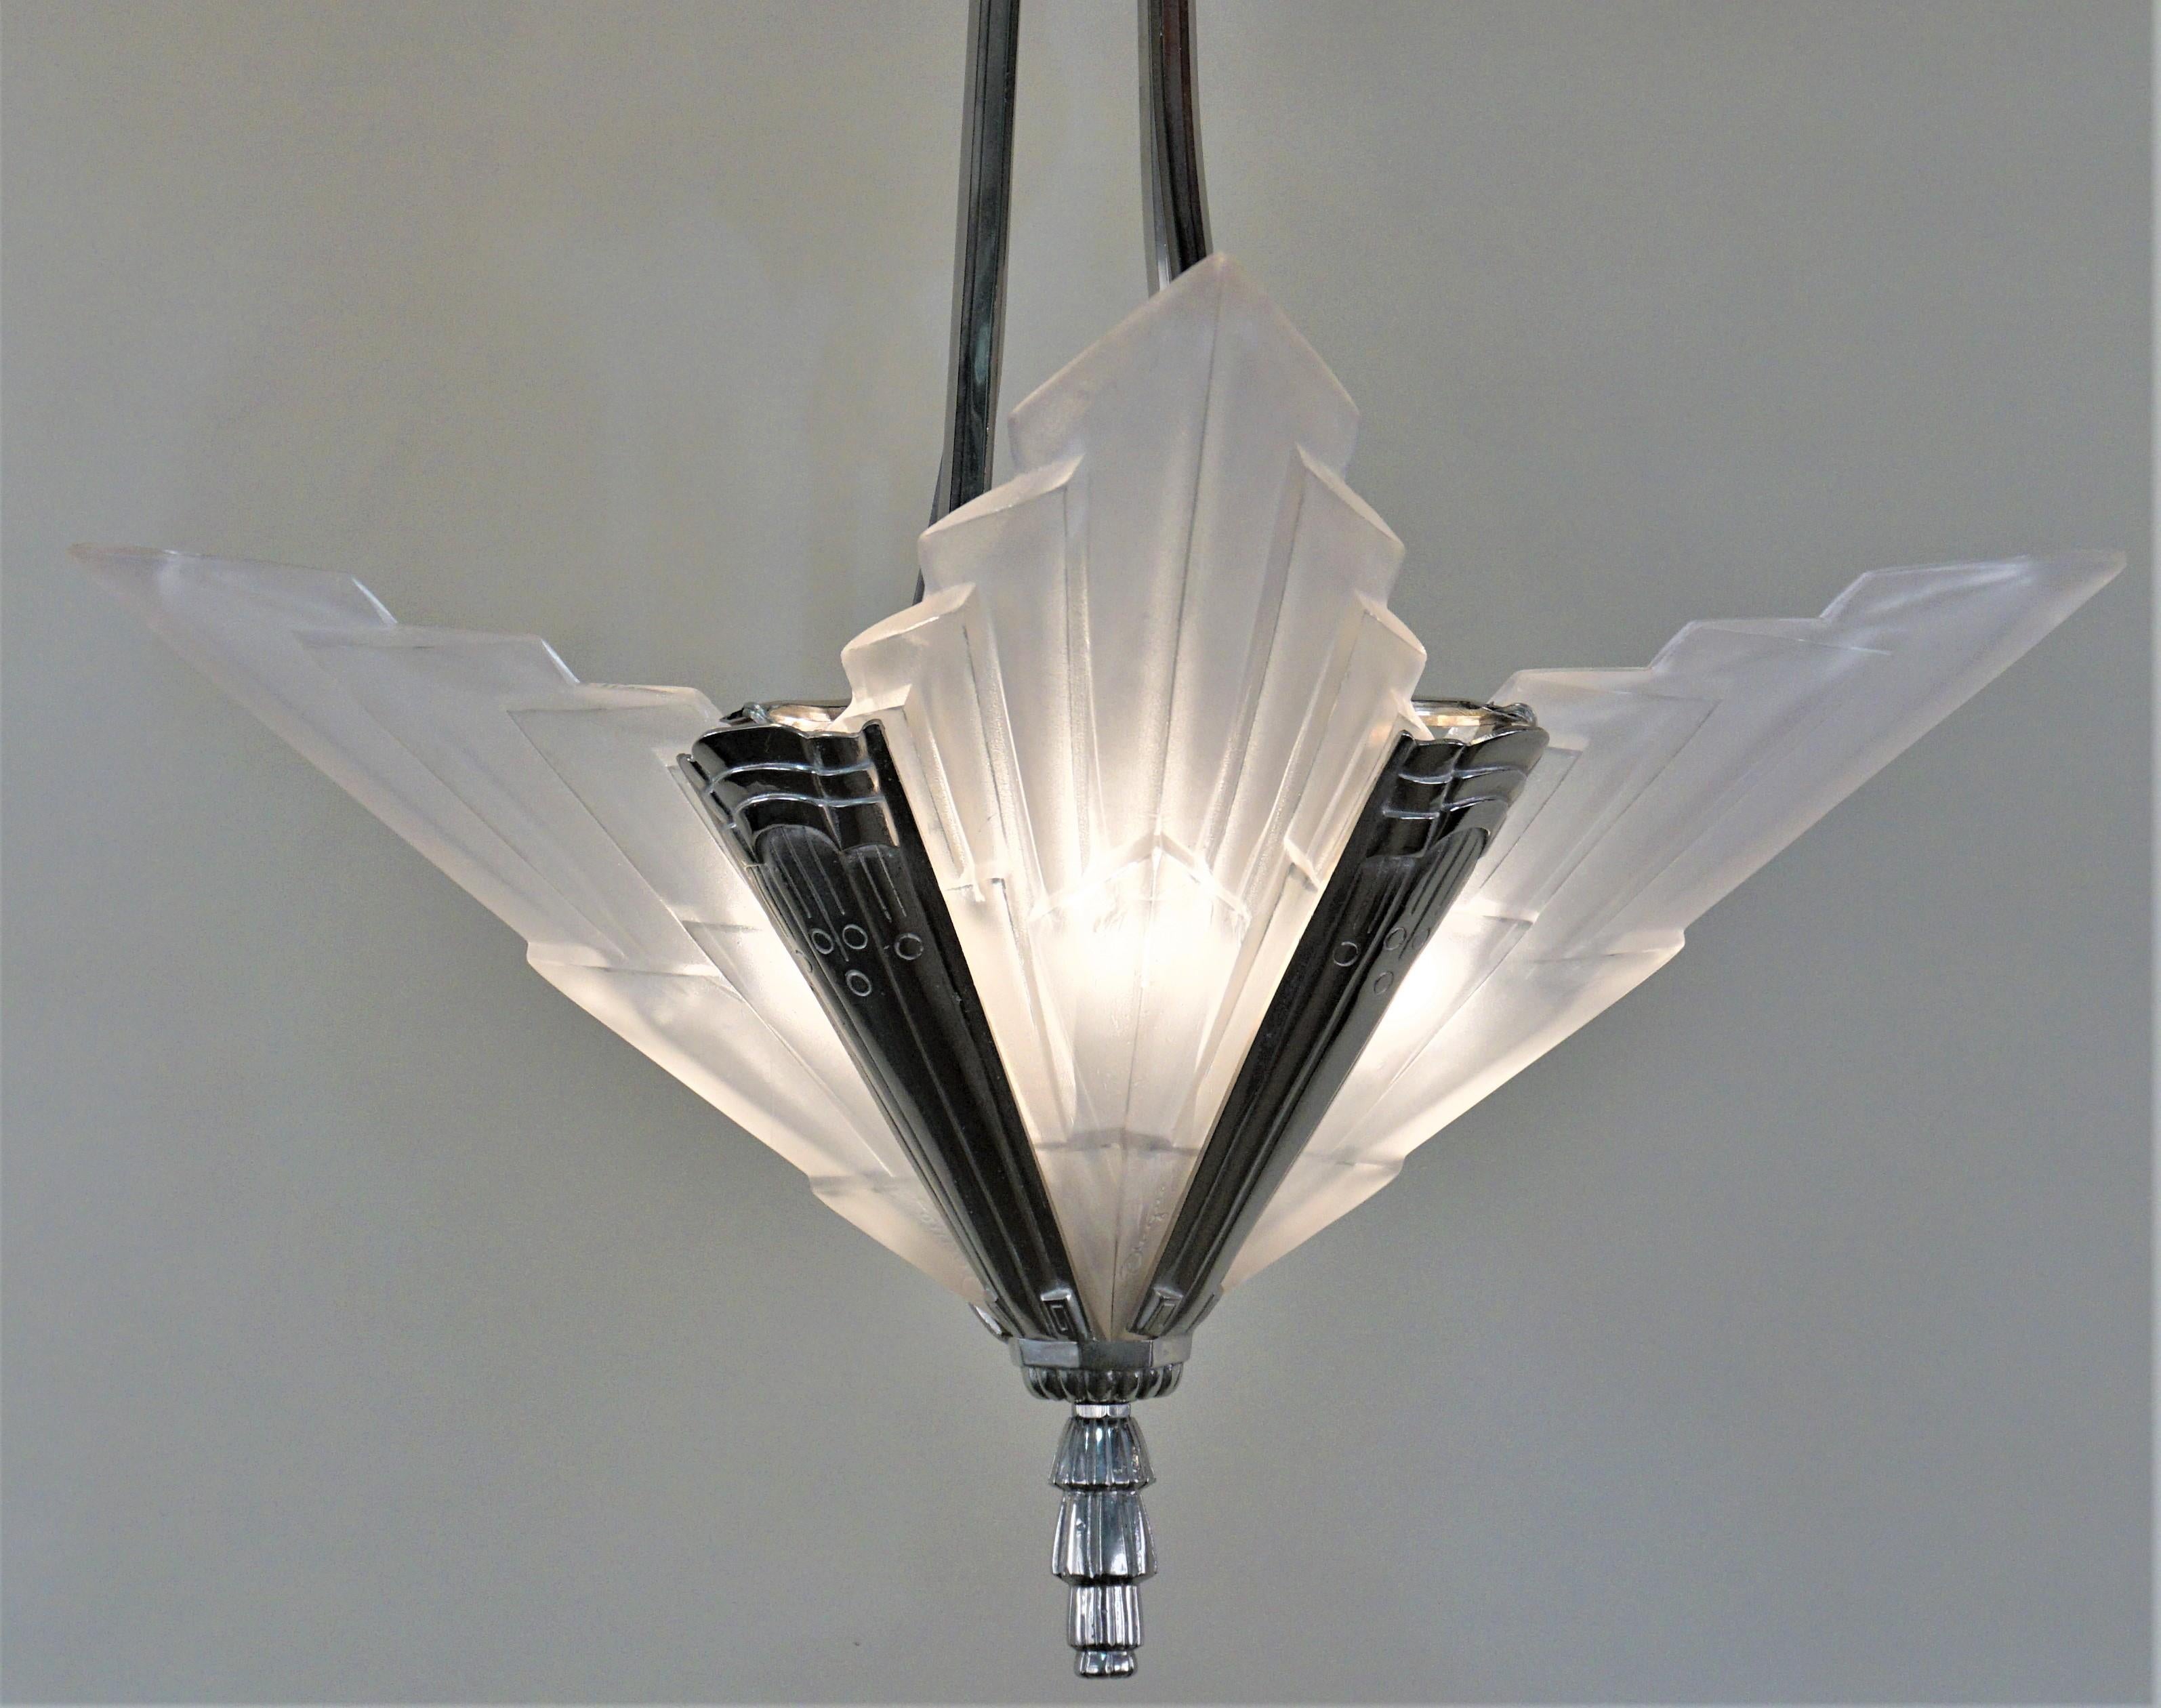 Art Deco chandelier created by David Gueron known as Degue with four clear frost V-shape panels with touch of high light polish with nickel on bronze frame.